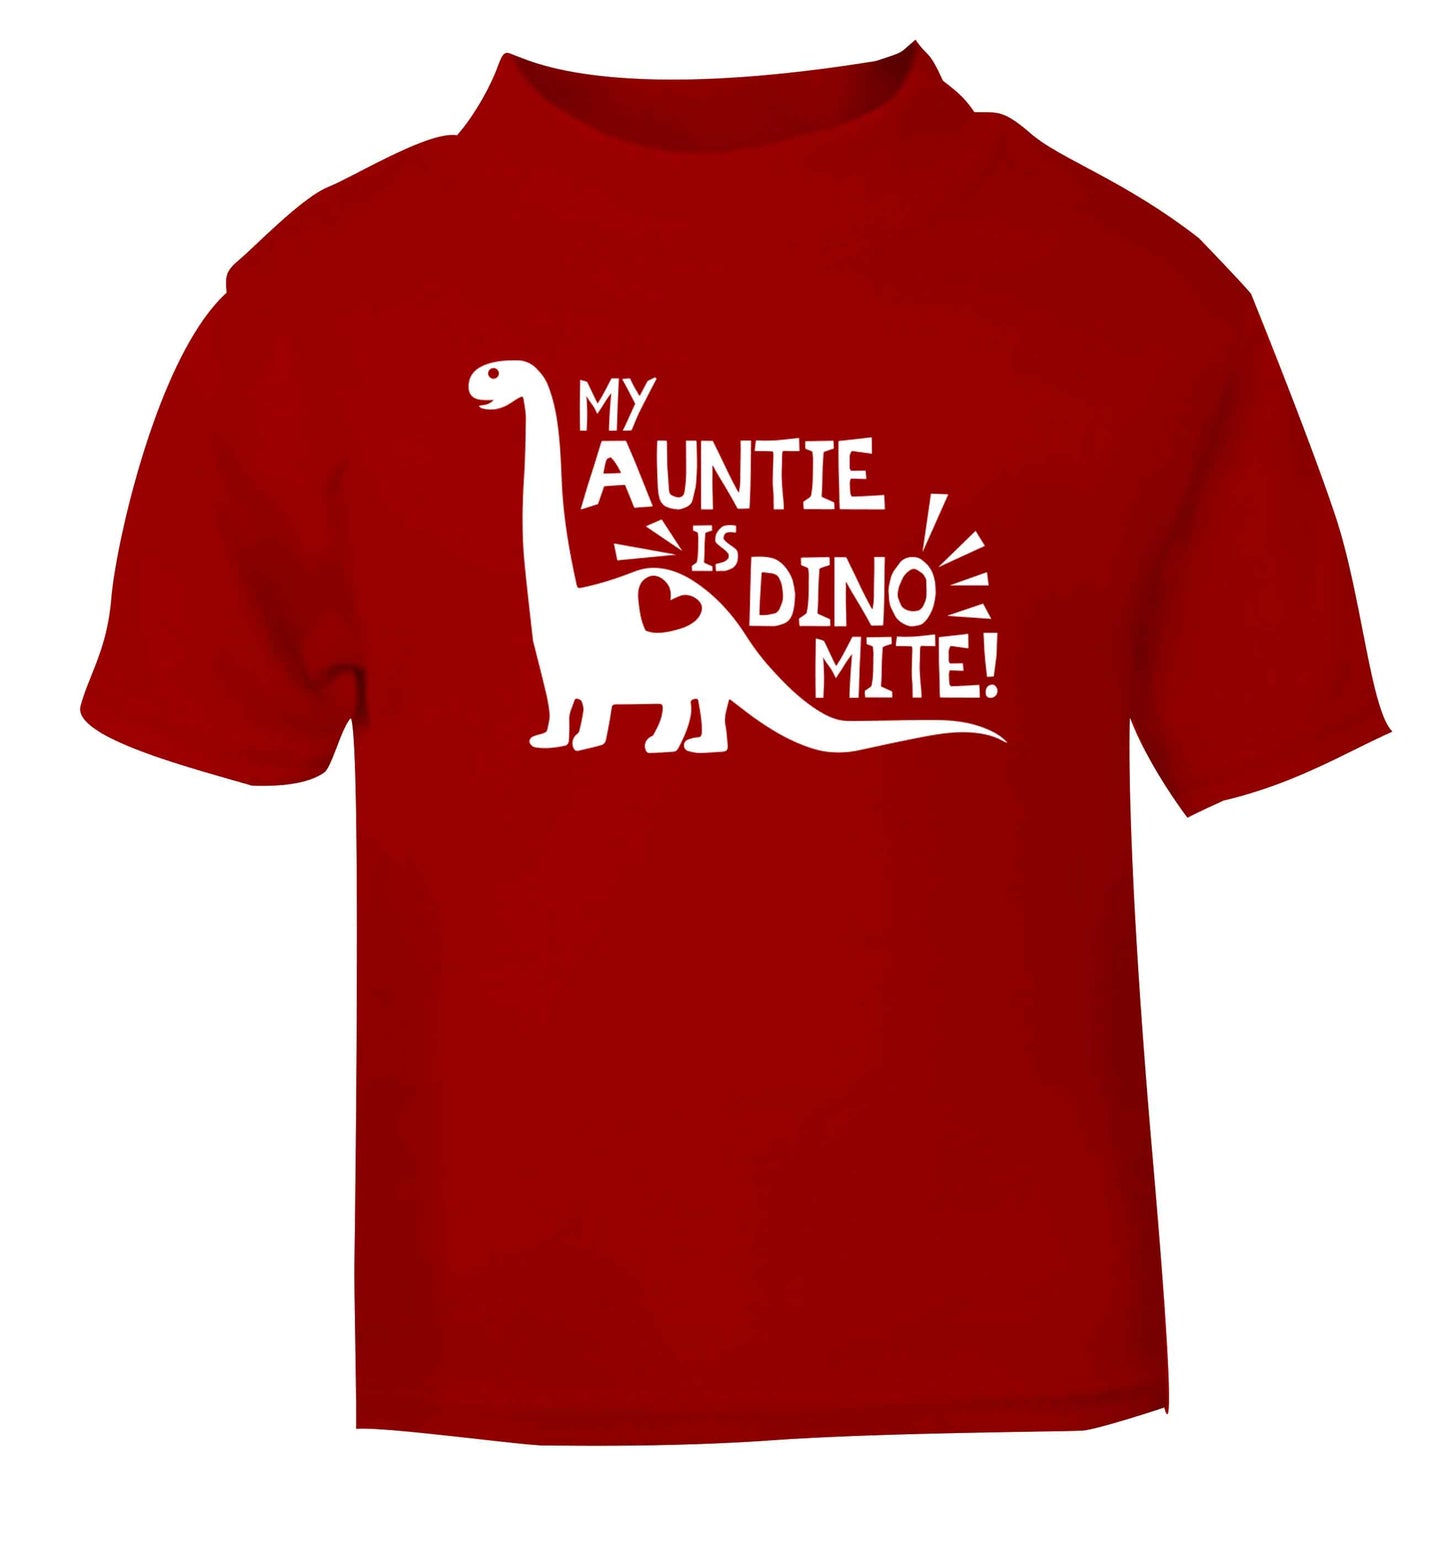 My auntie is dinomite! red Baby Toddler Tshirt 2 Years